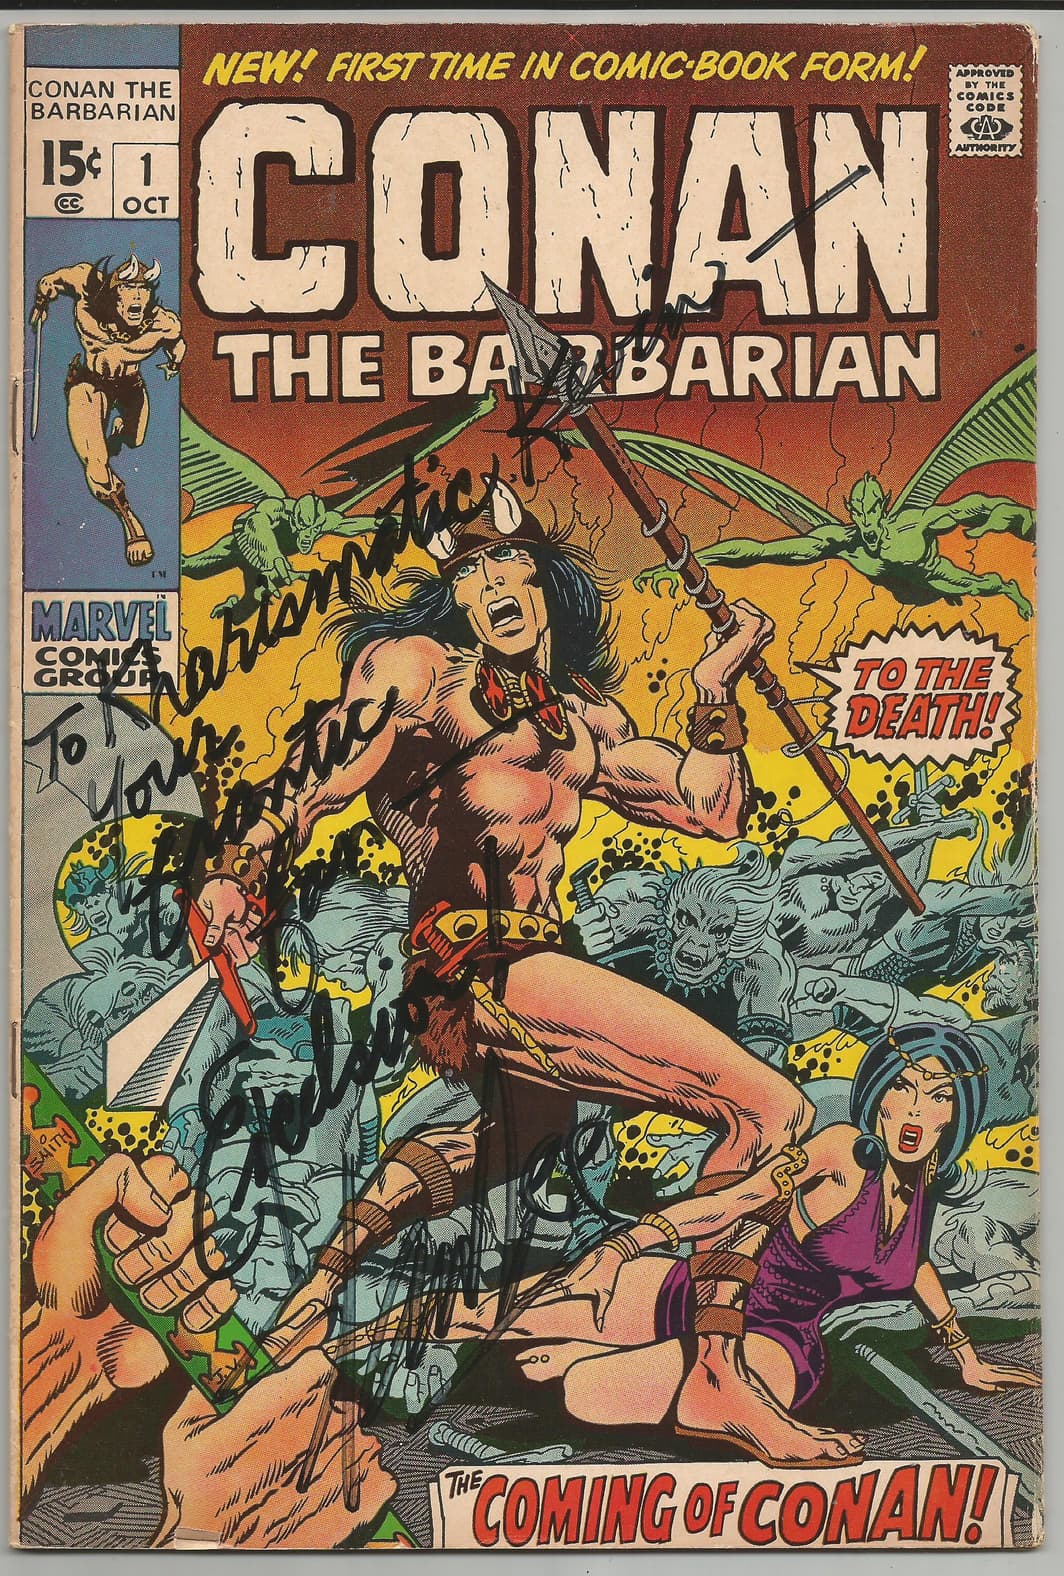 Kevin Eastman's copy of Conan the Barbarian #1, signed by Stan Lee